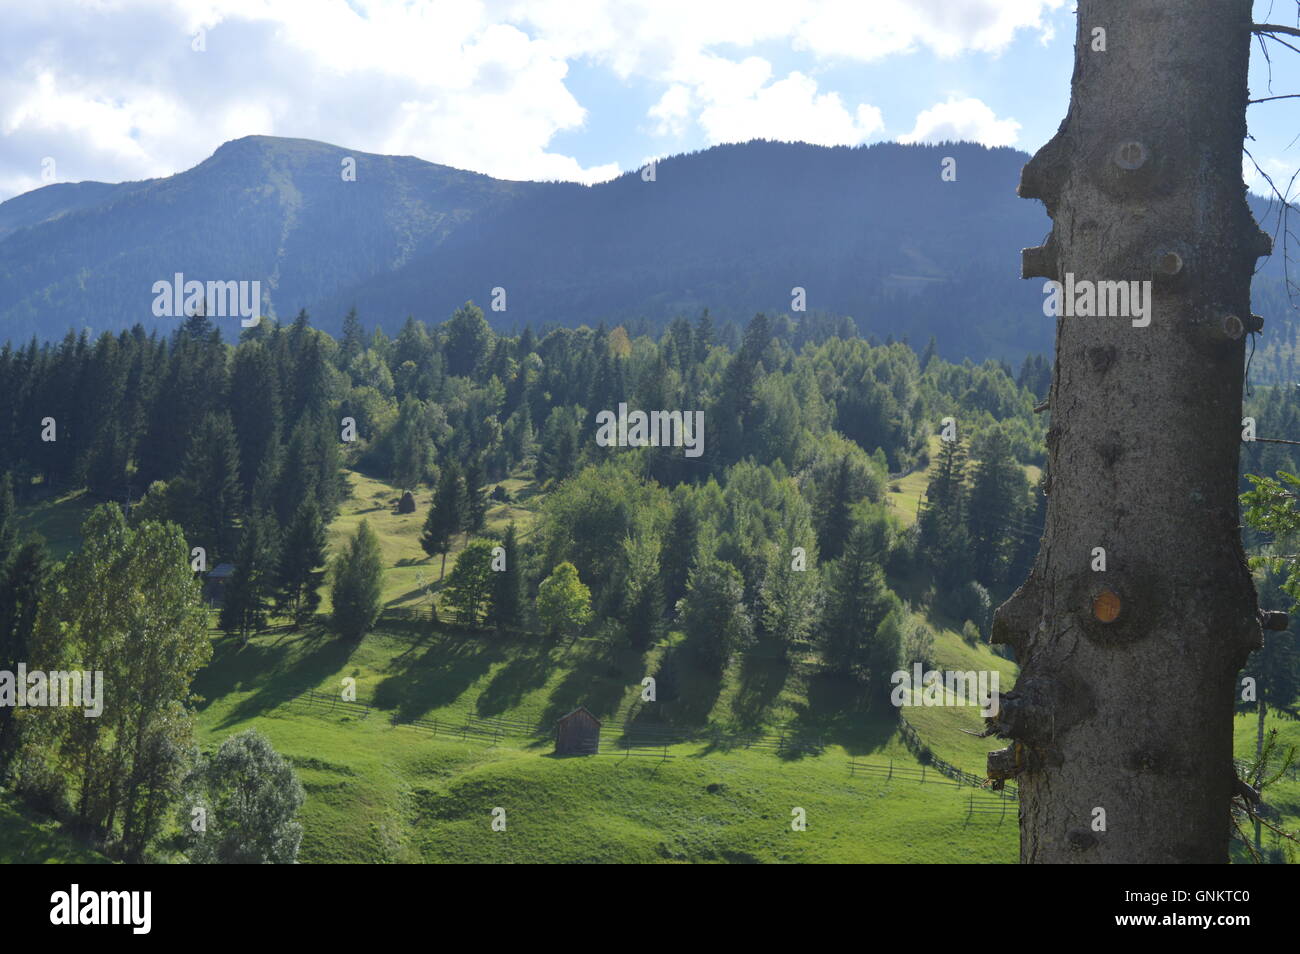 Landscape with forested mountains Stock Photo